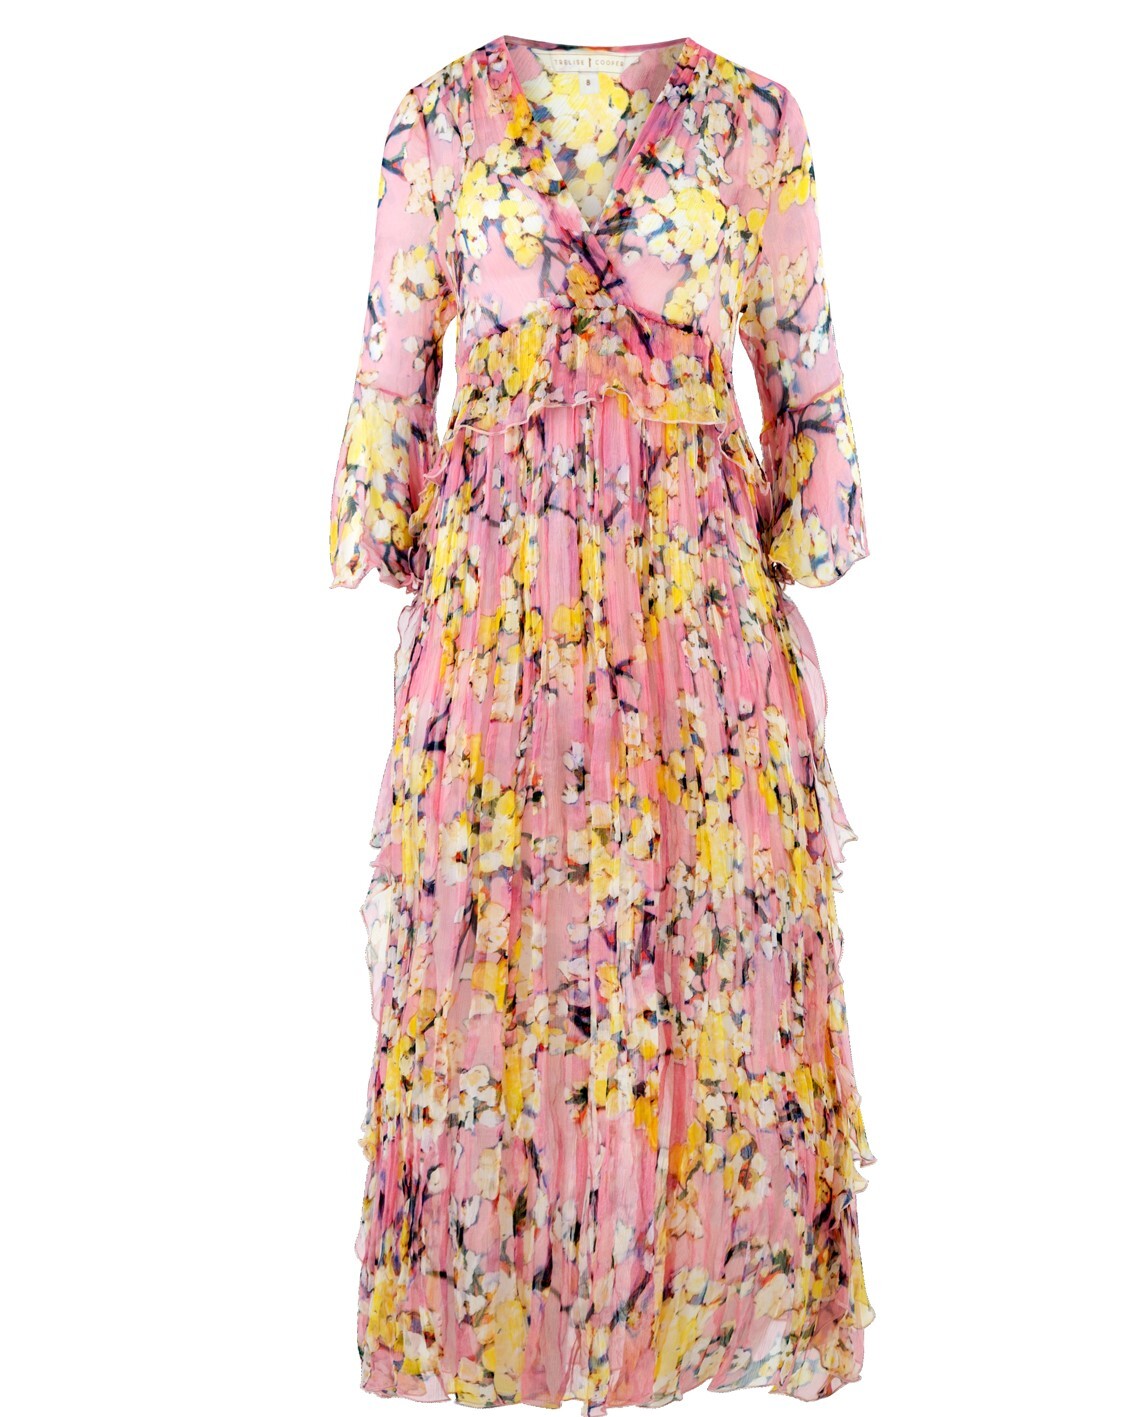 BARE MY SOUL DRESS (PINK BLOSSOM)- TRELISE COOPER SPRING 21 Boxing Day Sale